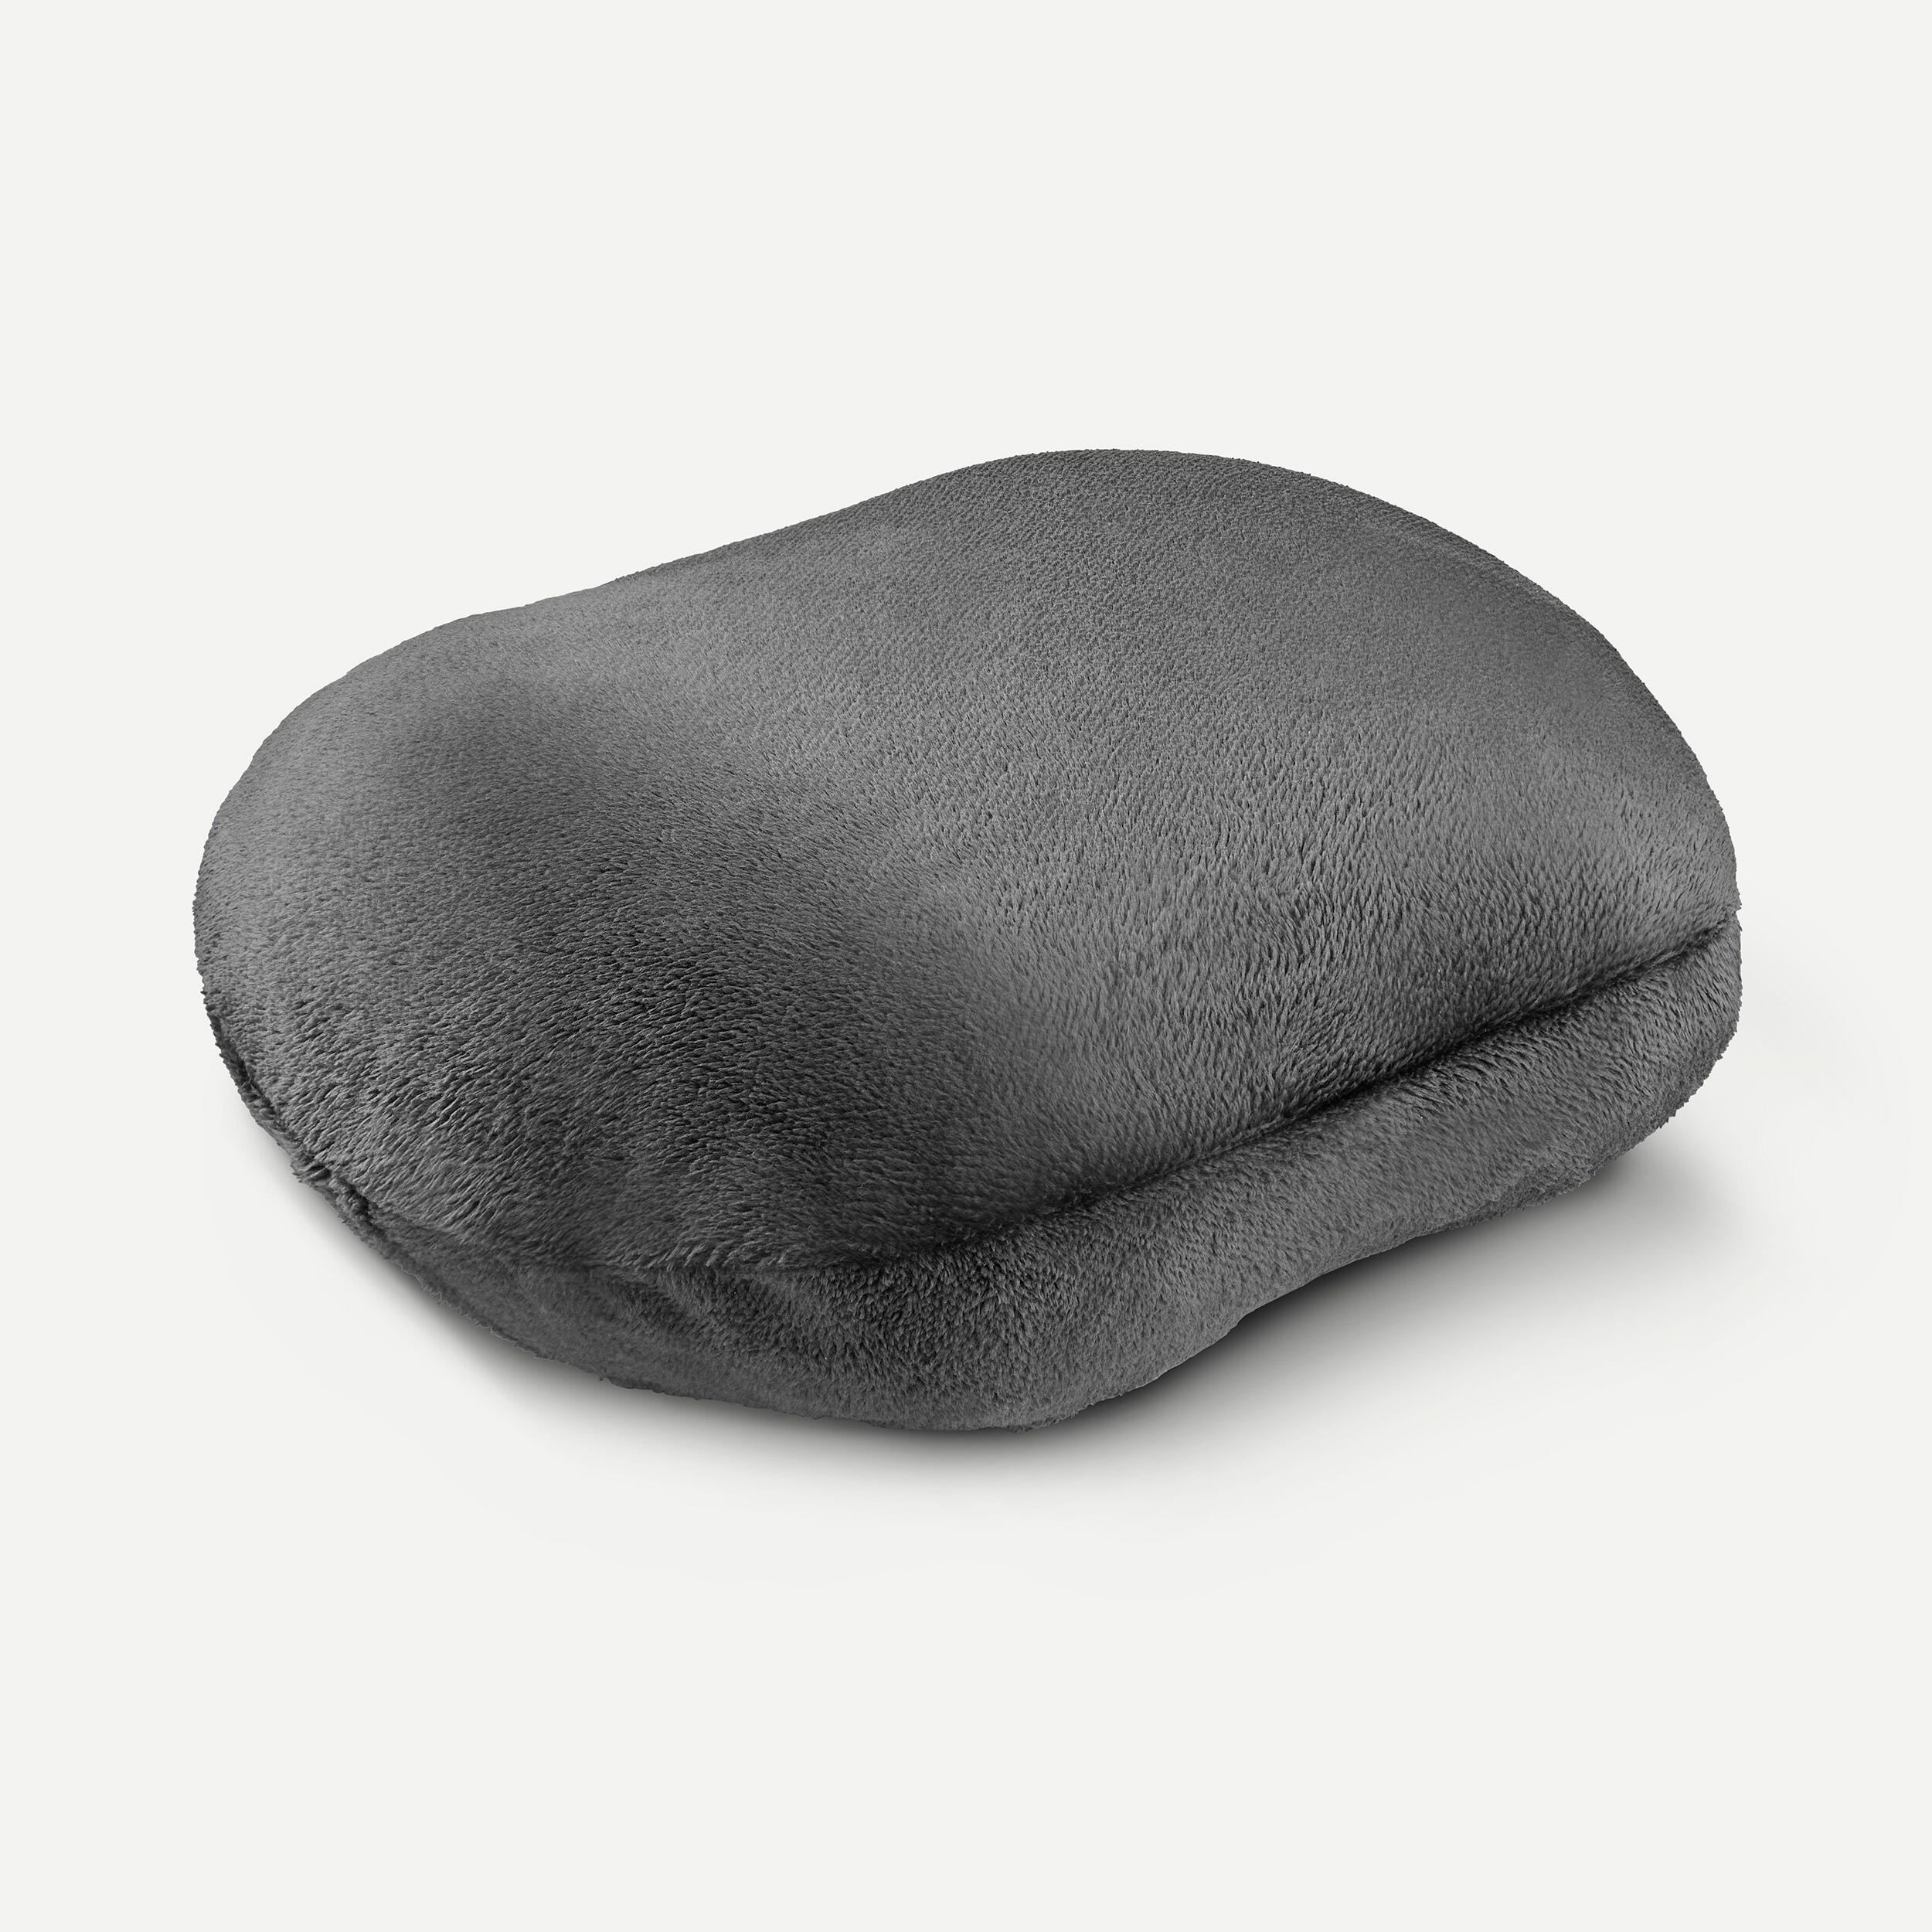 FORCLAZ 2 In 1 travel pillow-Travel 500